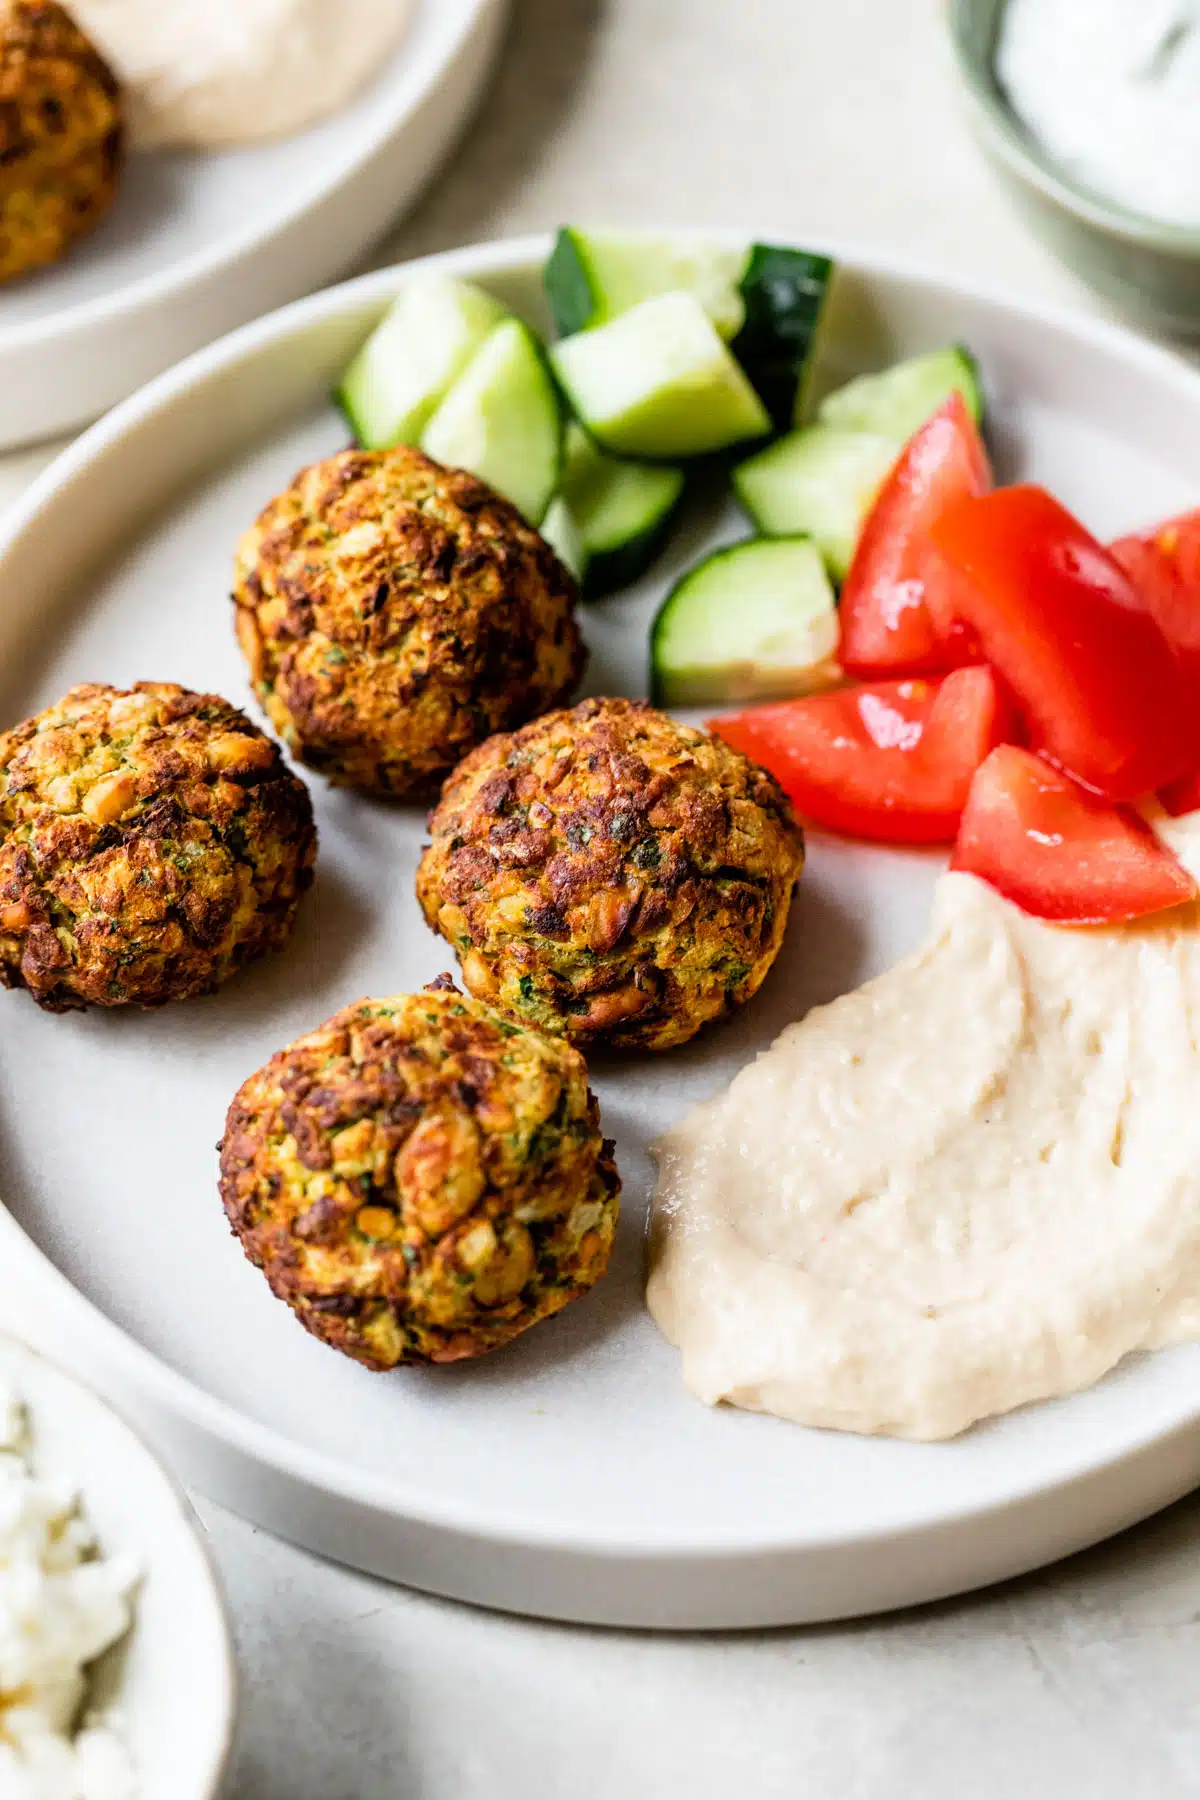 falafel on a plate with hummus, tomatoes and cucumber